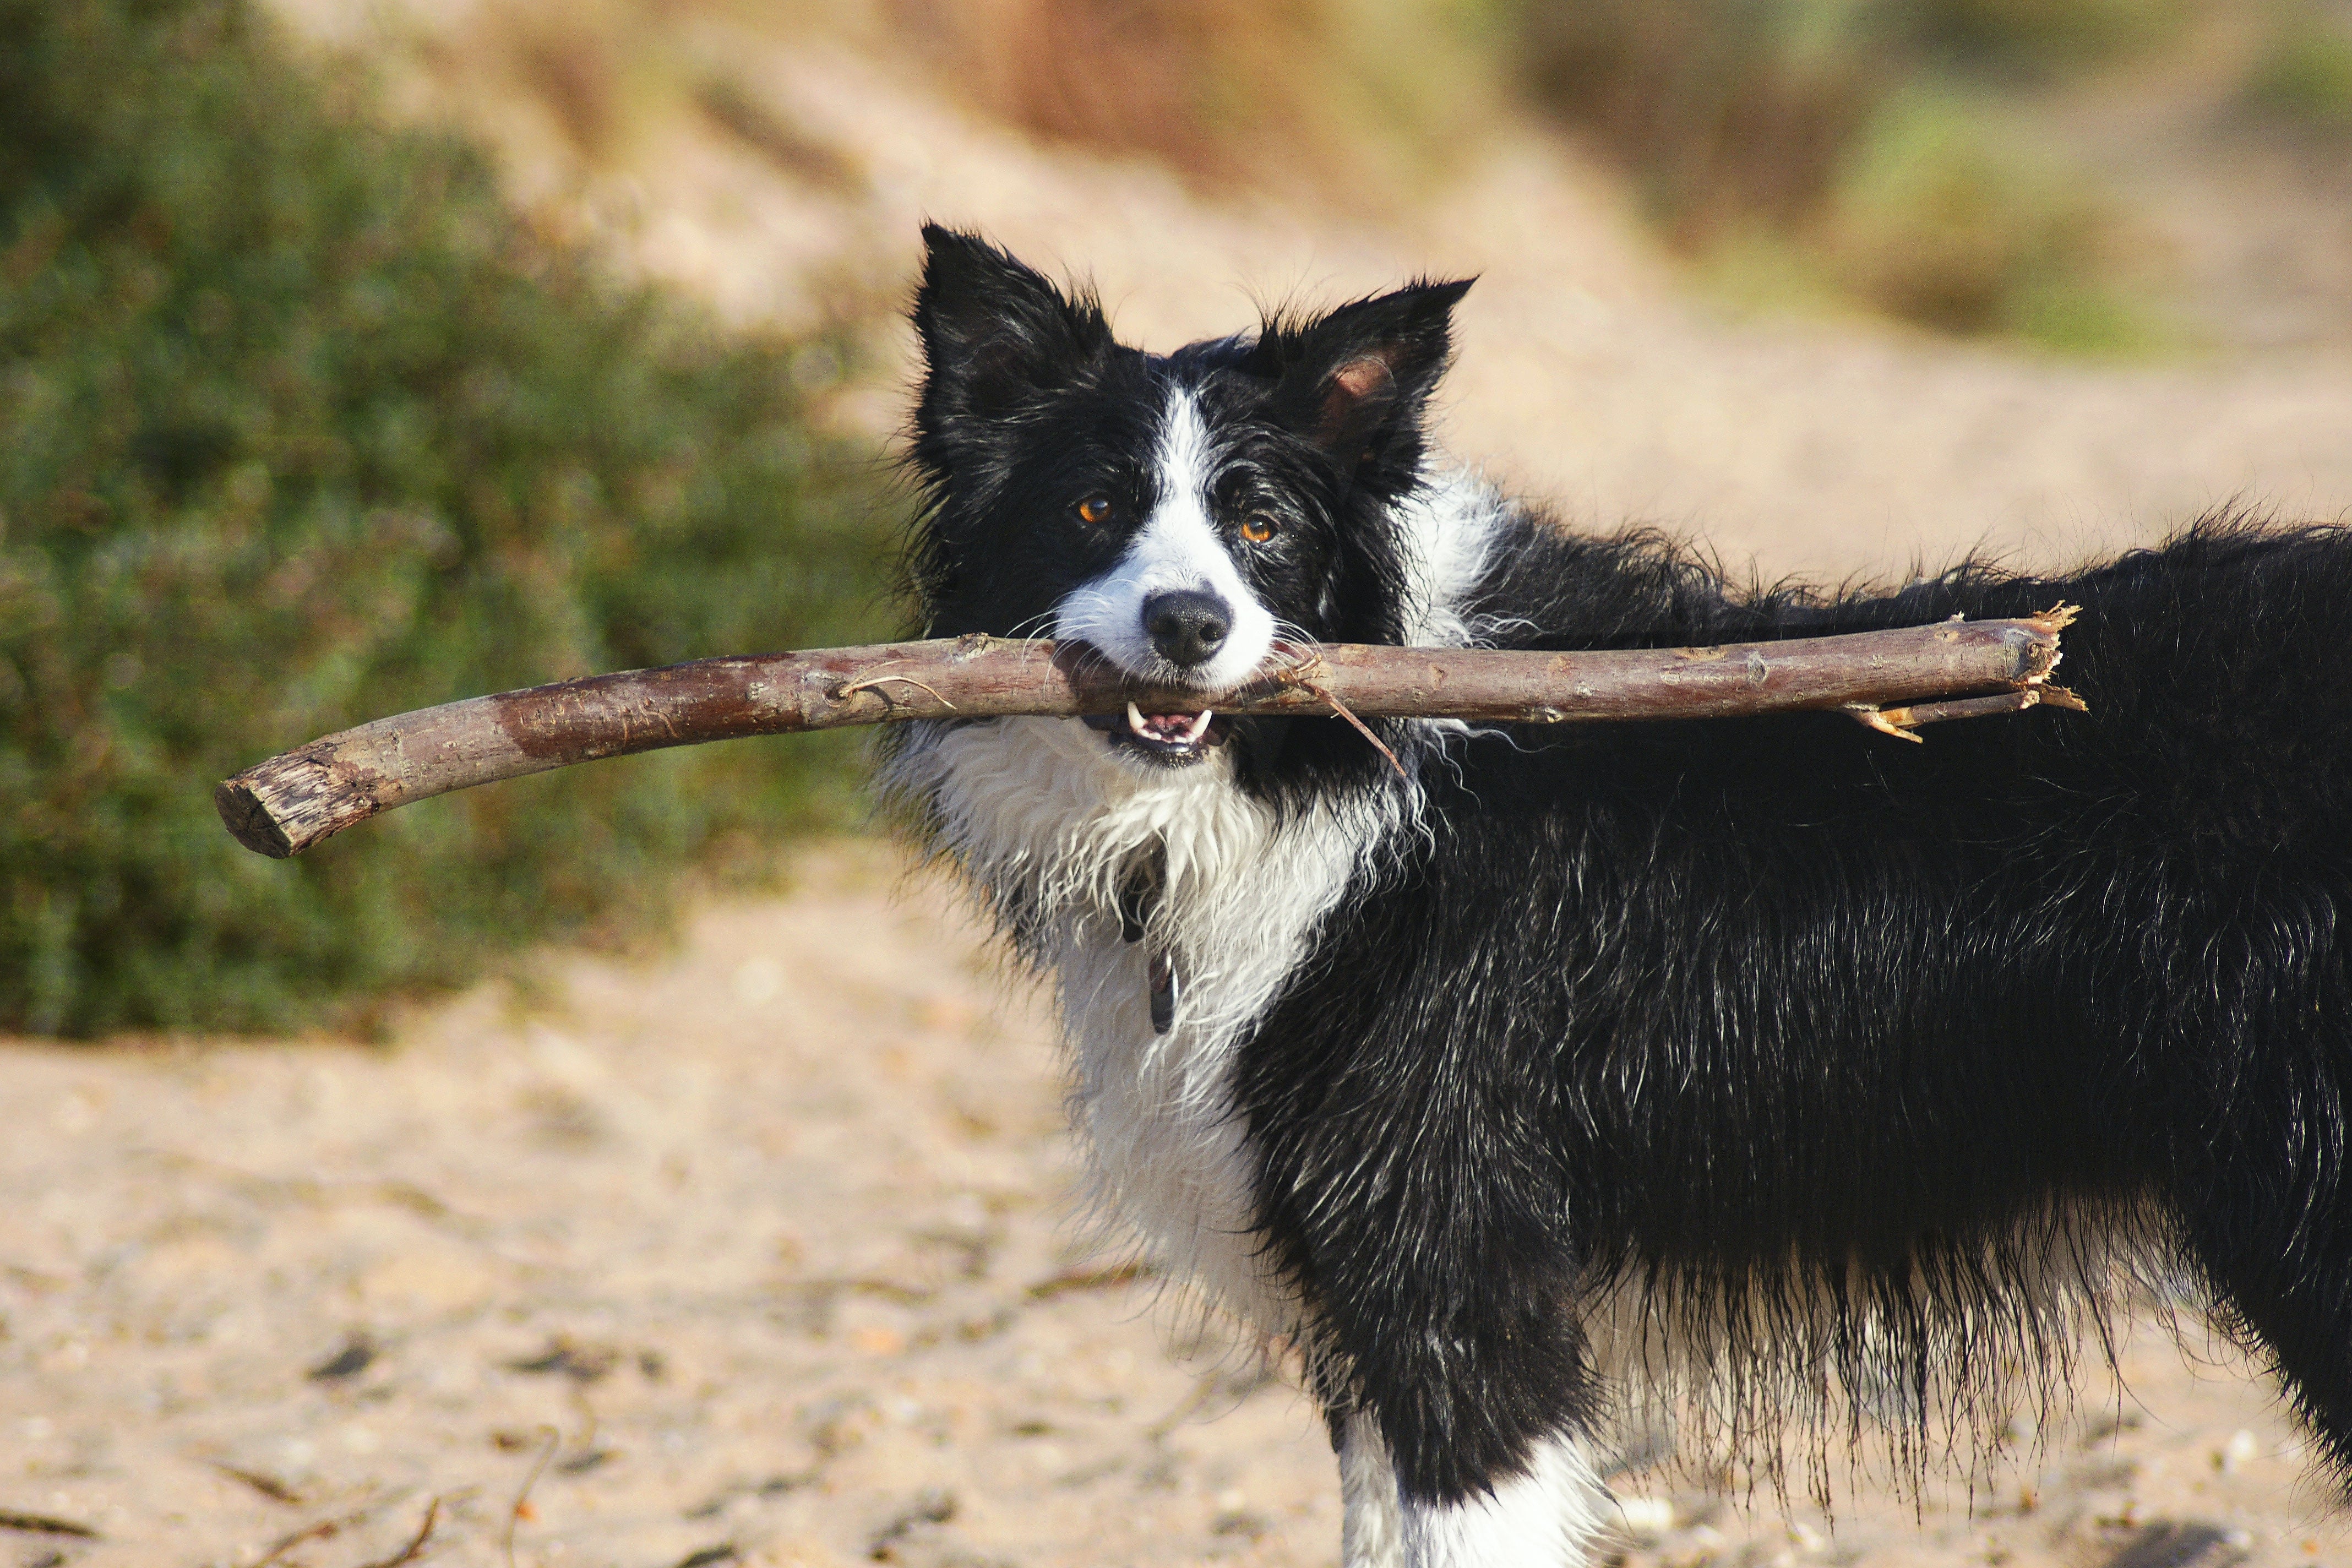 The Border Collie eagerly engages in dynamic activities such as playing fetch